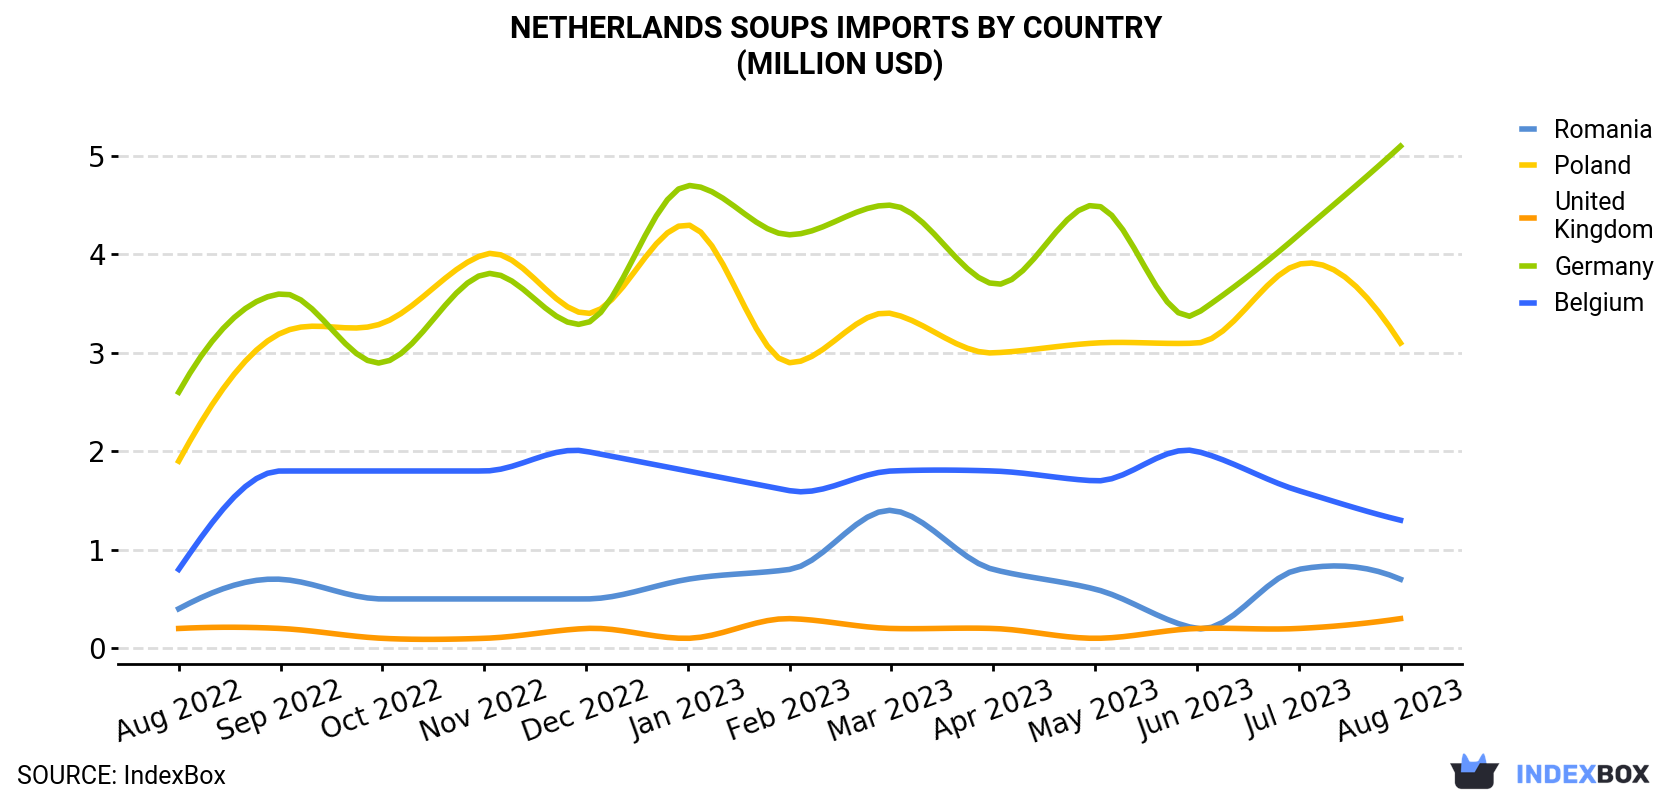 Netherlands Soups Imports By Country (Million USD)